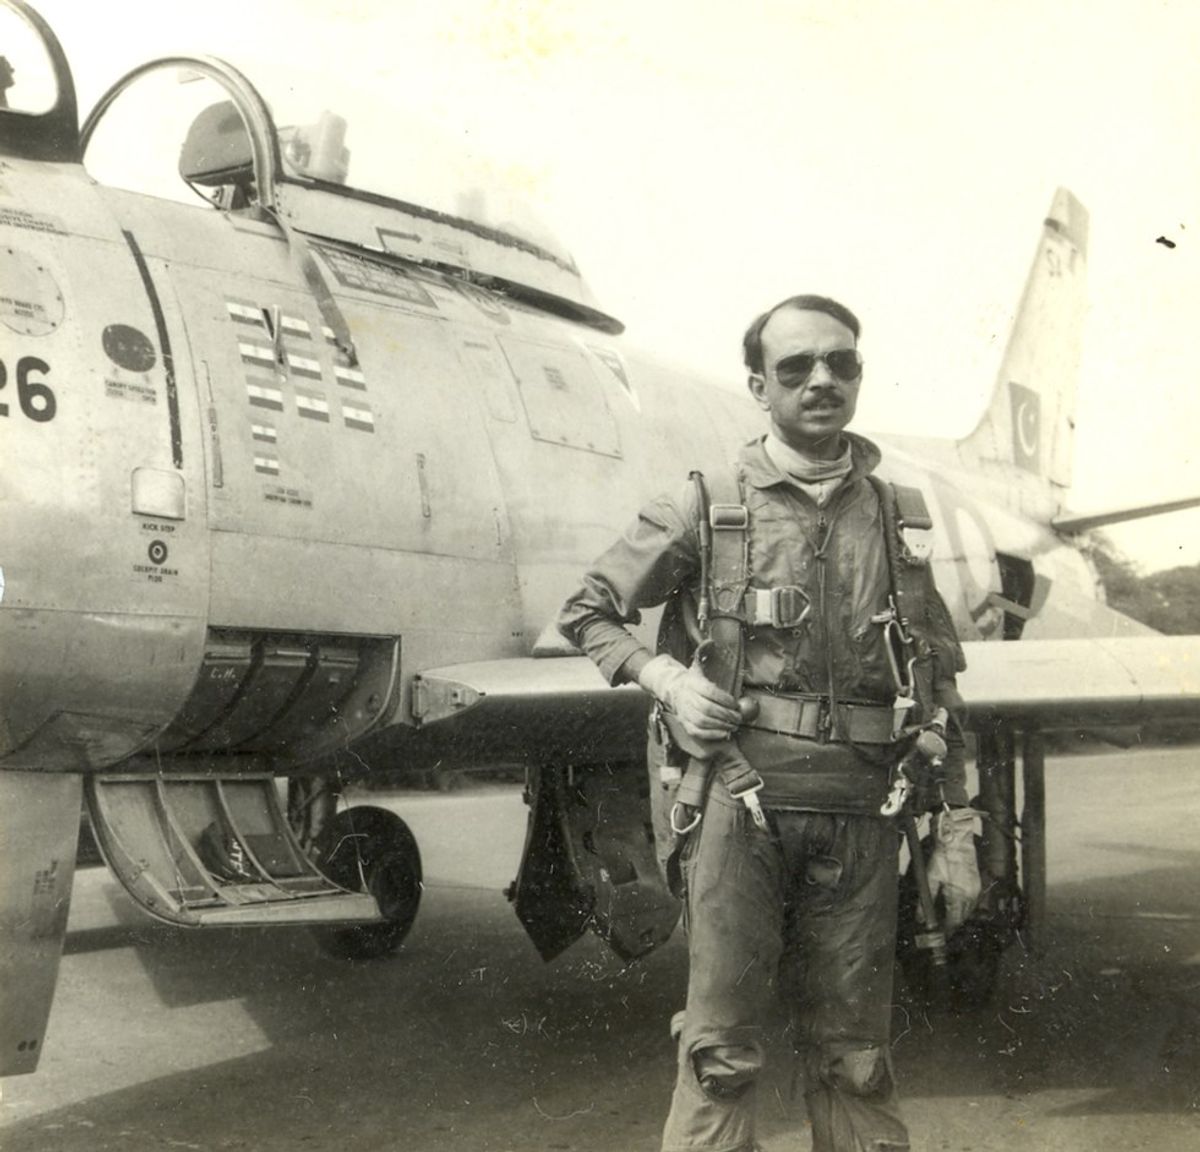 The Greatest F-86 Sabre Flying Ace